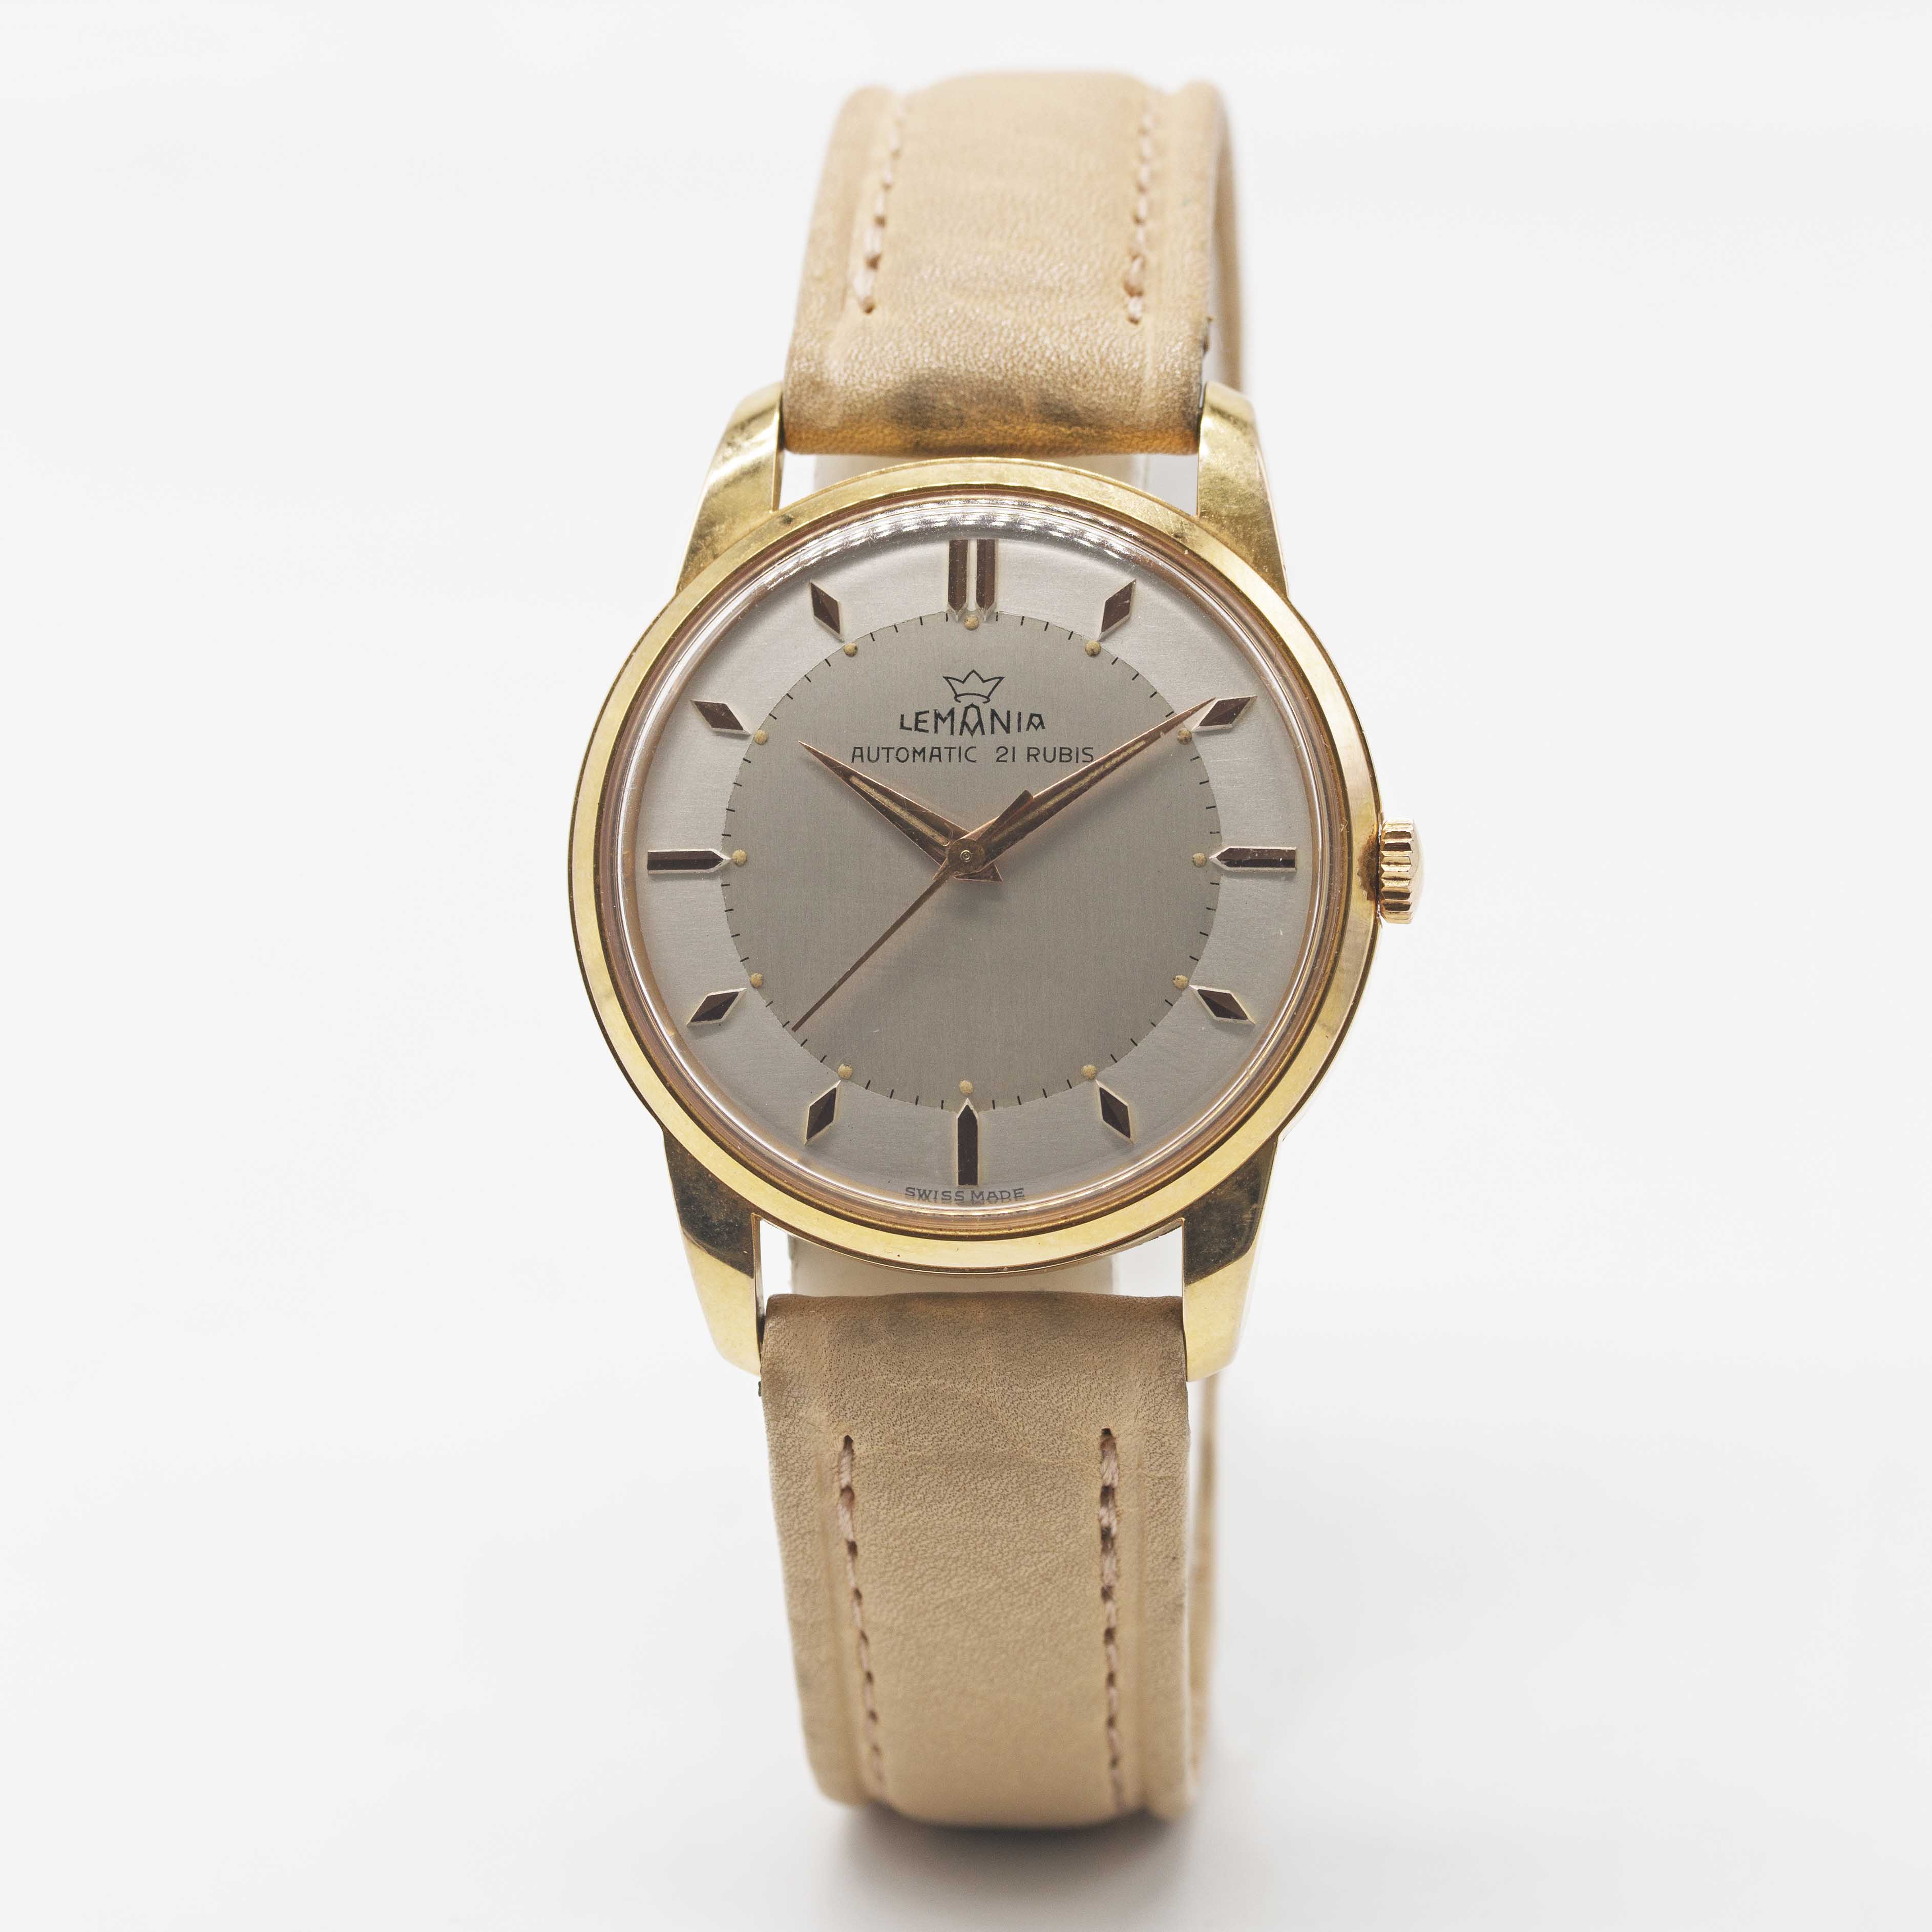 A GENTLEMAN'S "NOS' GOLD PLATED LEMANIA AUTOMATIC WRIST WATCH CIRCA 1950s, TWO TONE SILVER DIAL & - Image 2 of 5